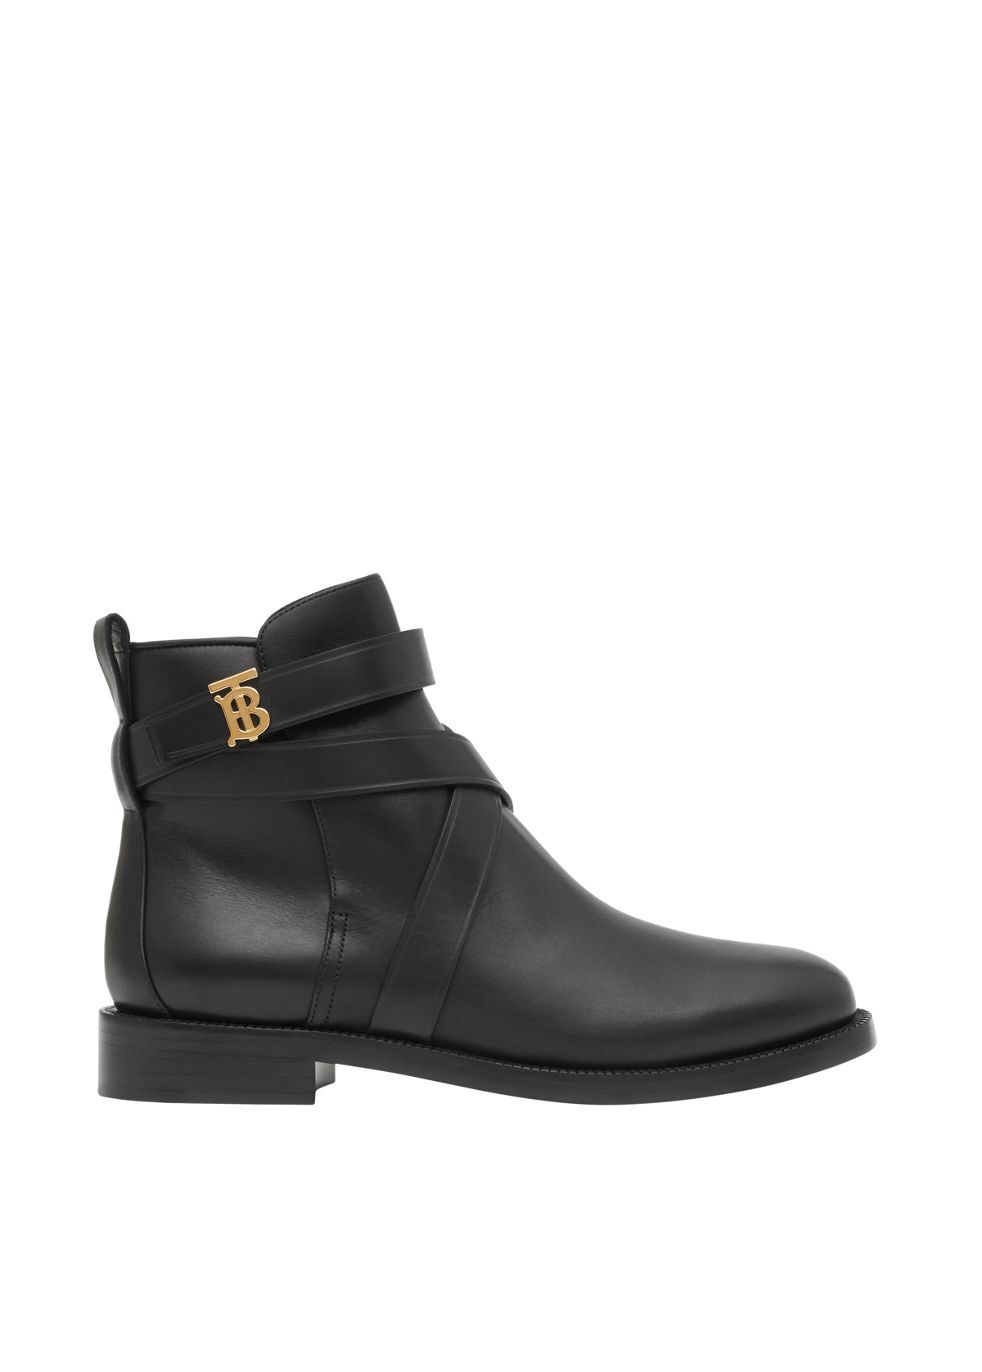 burberry ankle boots